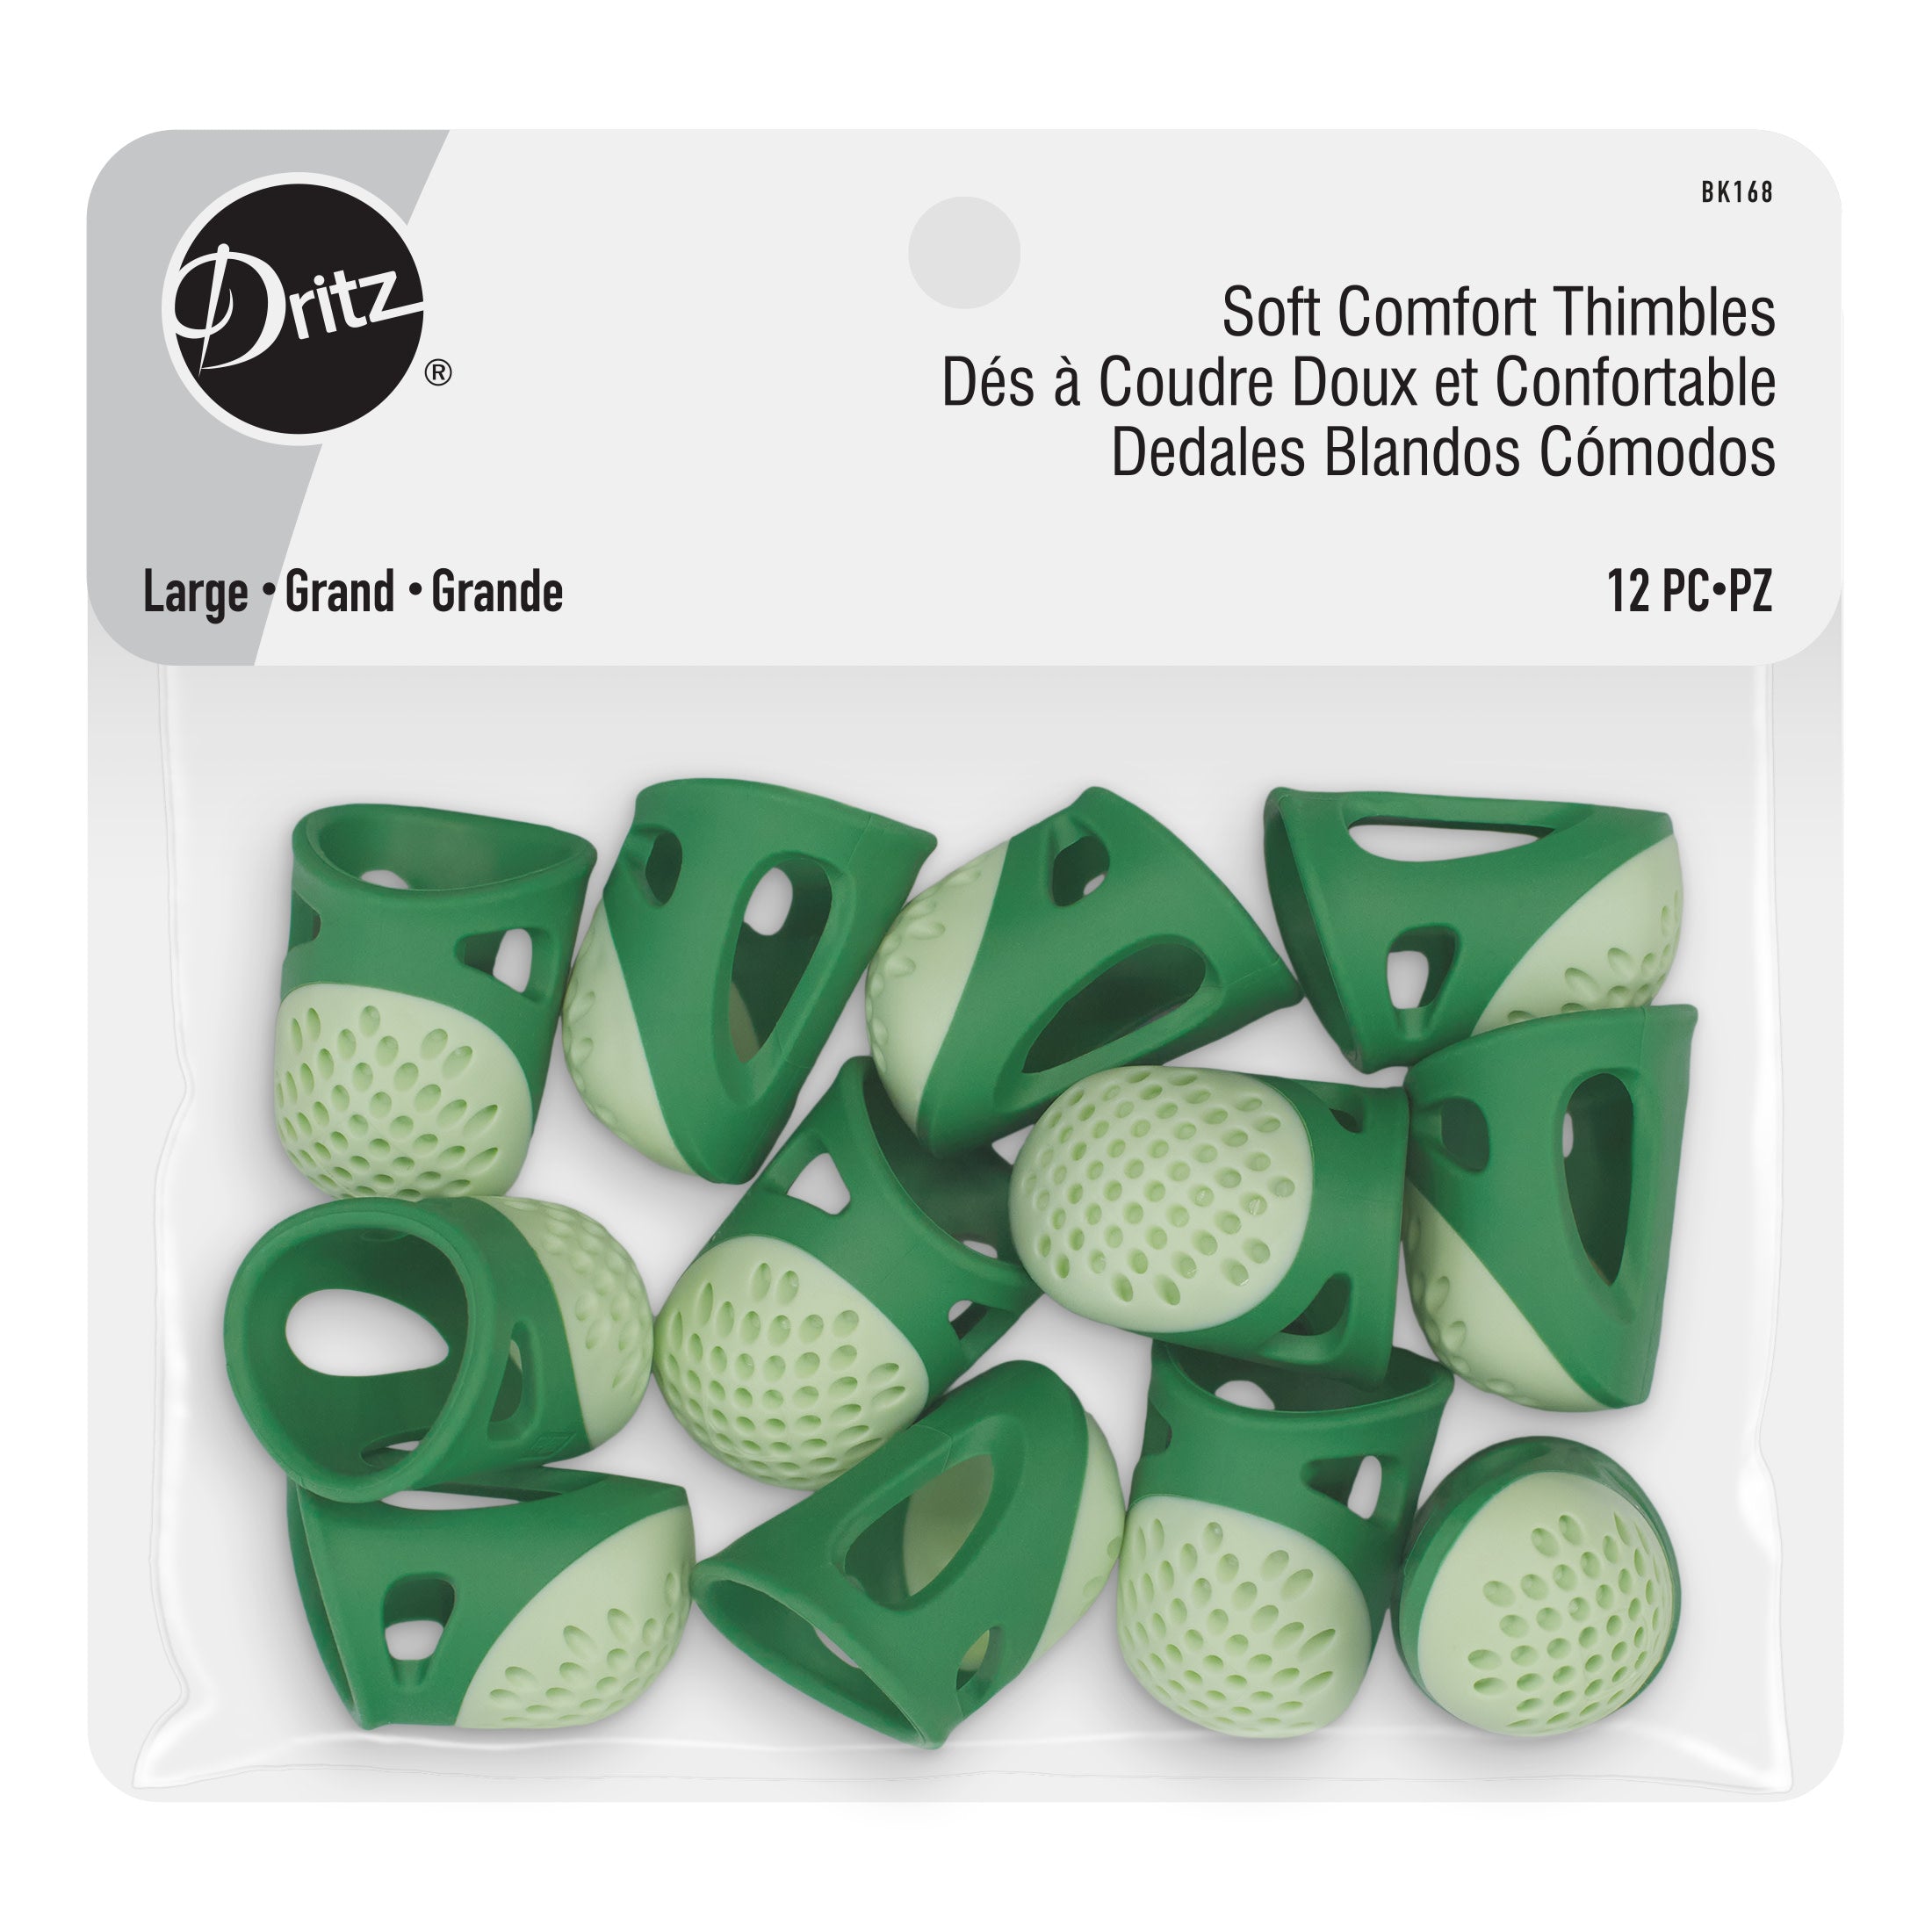 Tape Measures - 12 Pc.